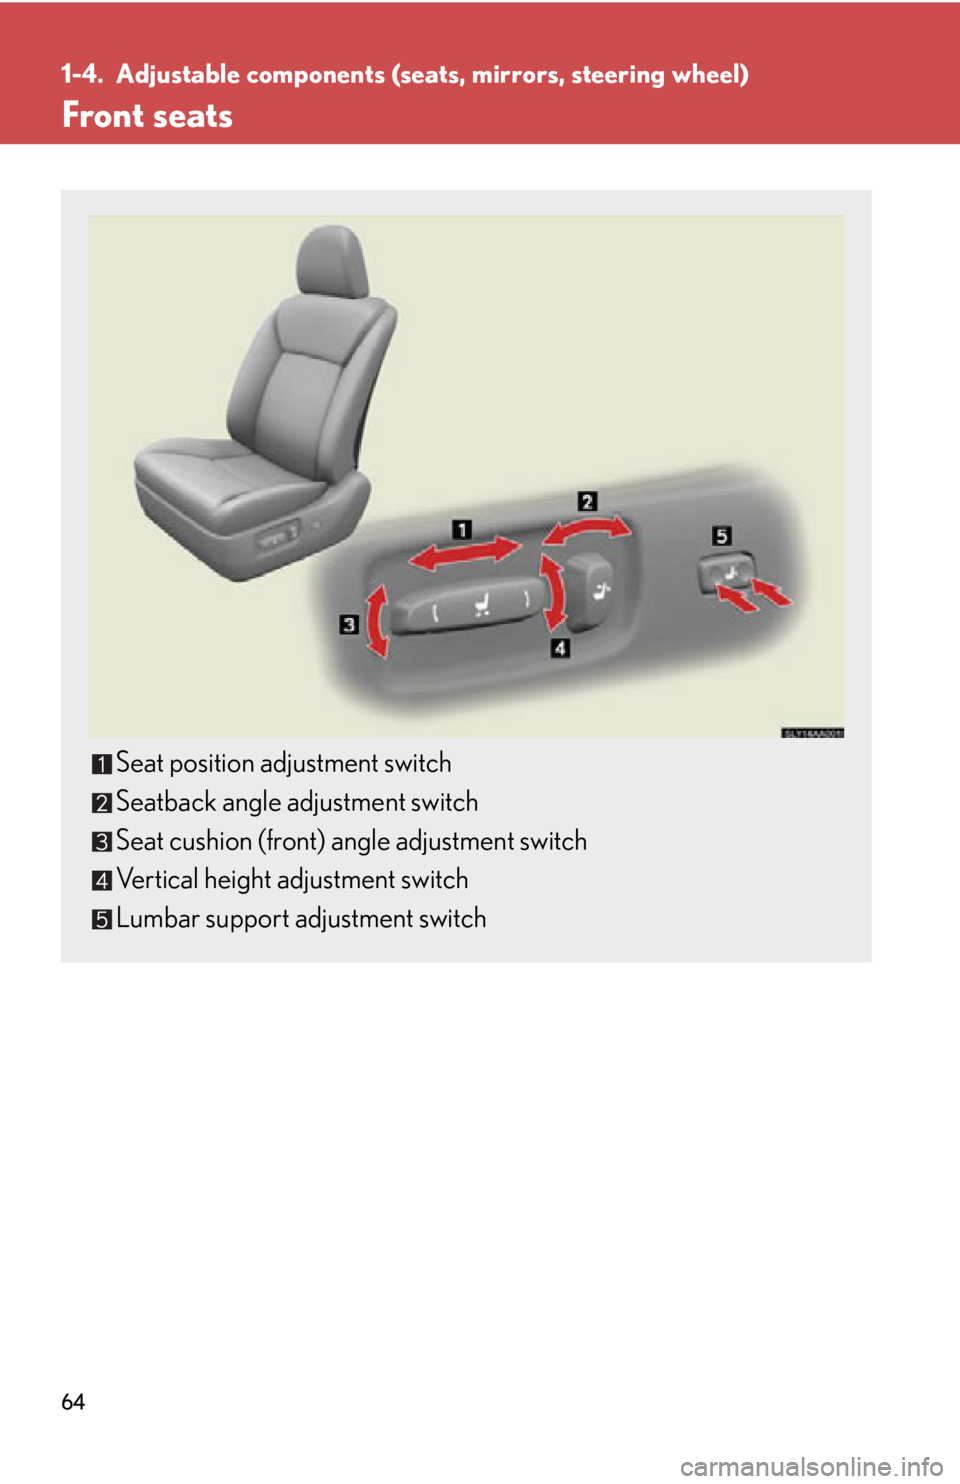 Lexus HS250h 2010  Using the Bluetooth audio system / LEXUS 2010 HS250H OWNERS MANUAL (OM75006U) 64
1-4. Adjustable components (seats, mirrors, steering wheel)
Front seats
Seat position adjustment switch
Seatback angle adjustment switch
Seat cushion (front) angle adjustment switch
Vertical height